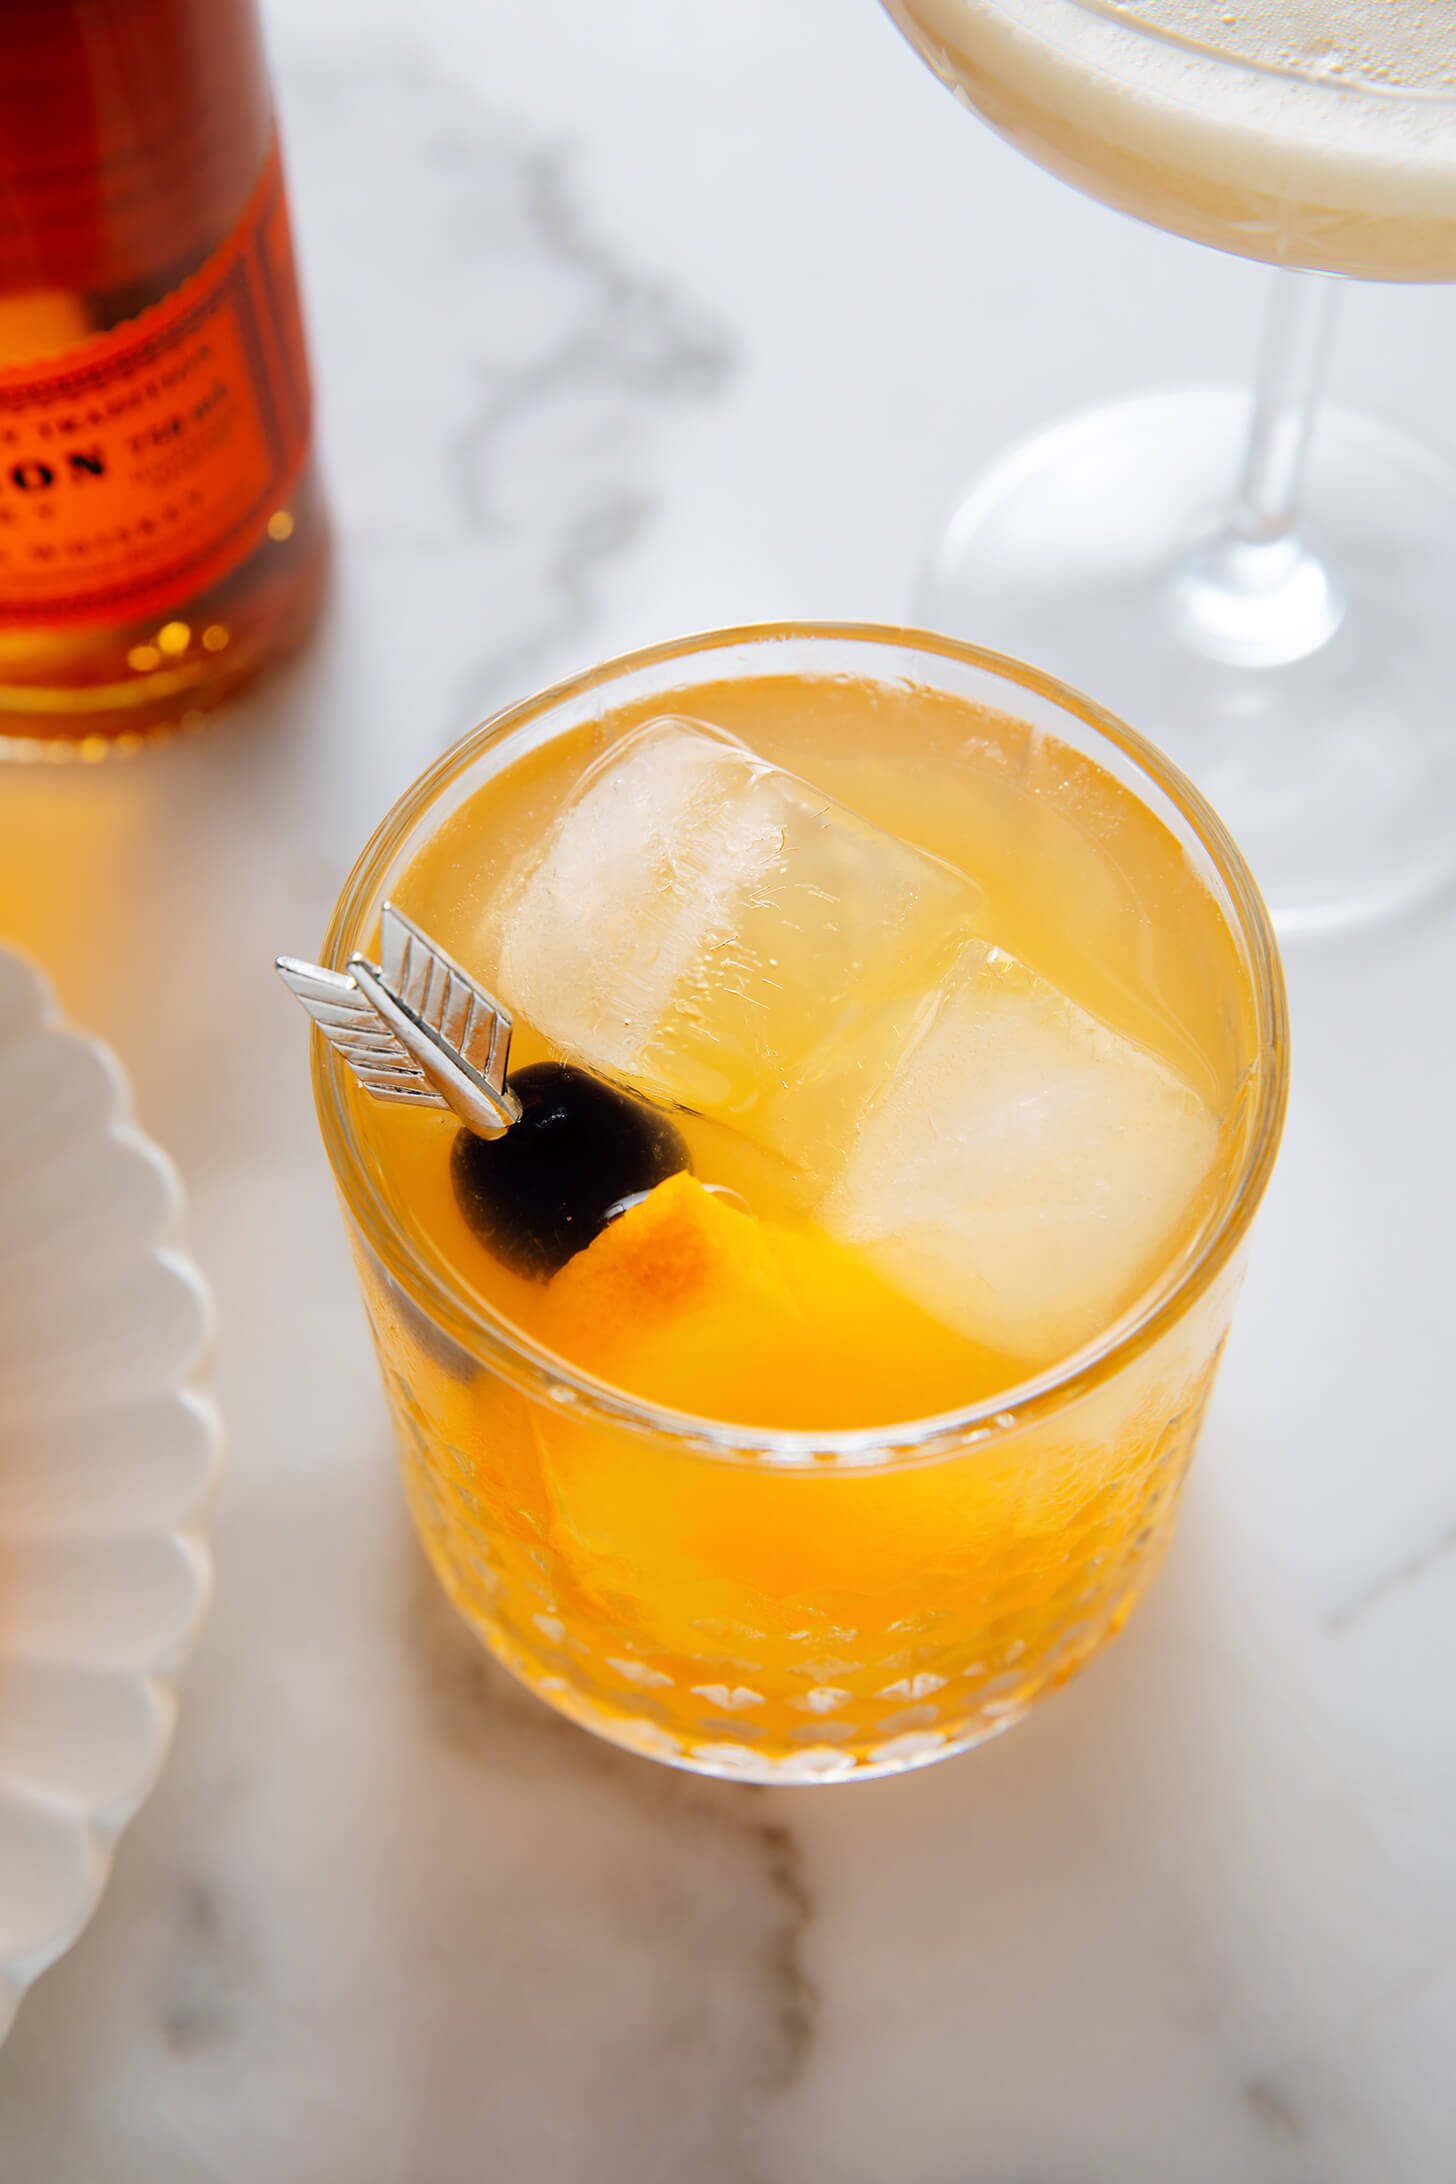 whiskey sour on the rocks (no egg, also known as a Boston Sour)